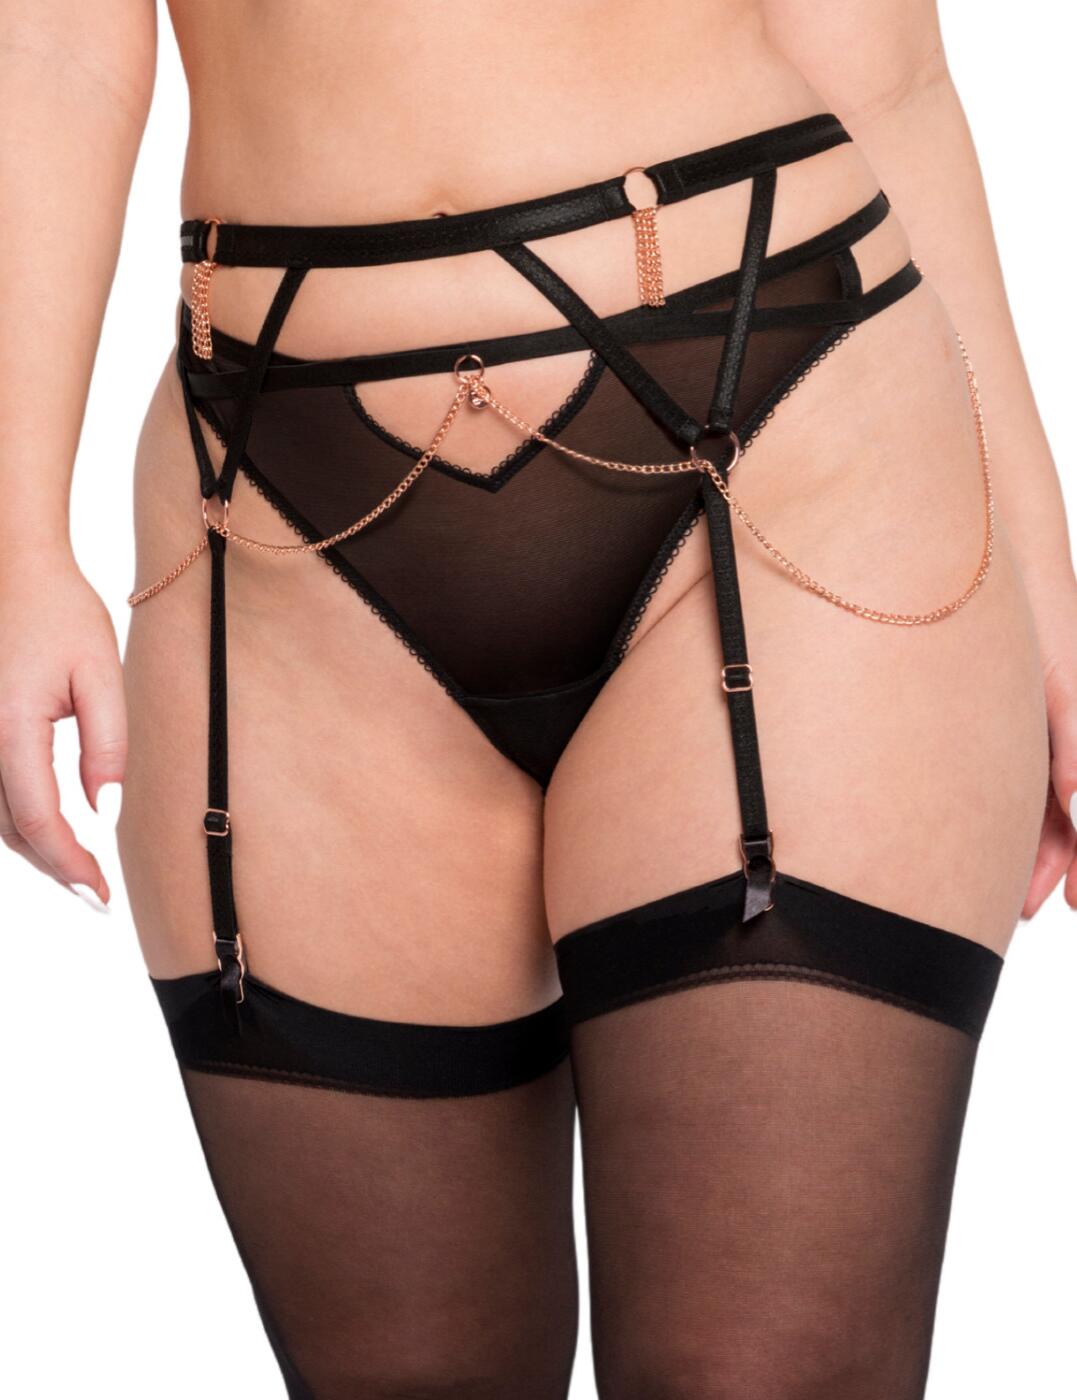 ST016800 Scantilly by Curvy Kate Unchained Suspender Belt - ST016800 Black 